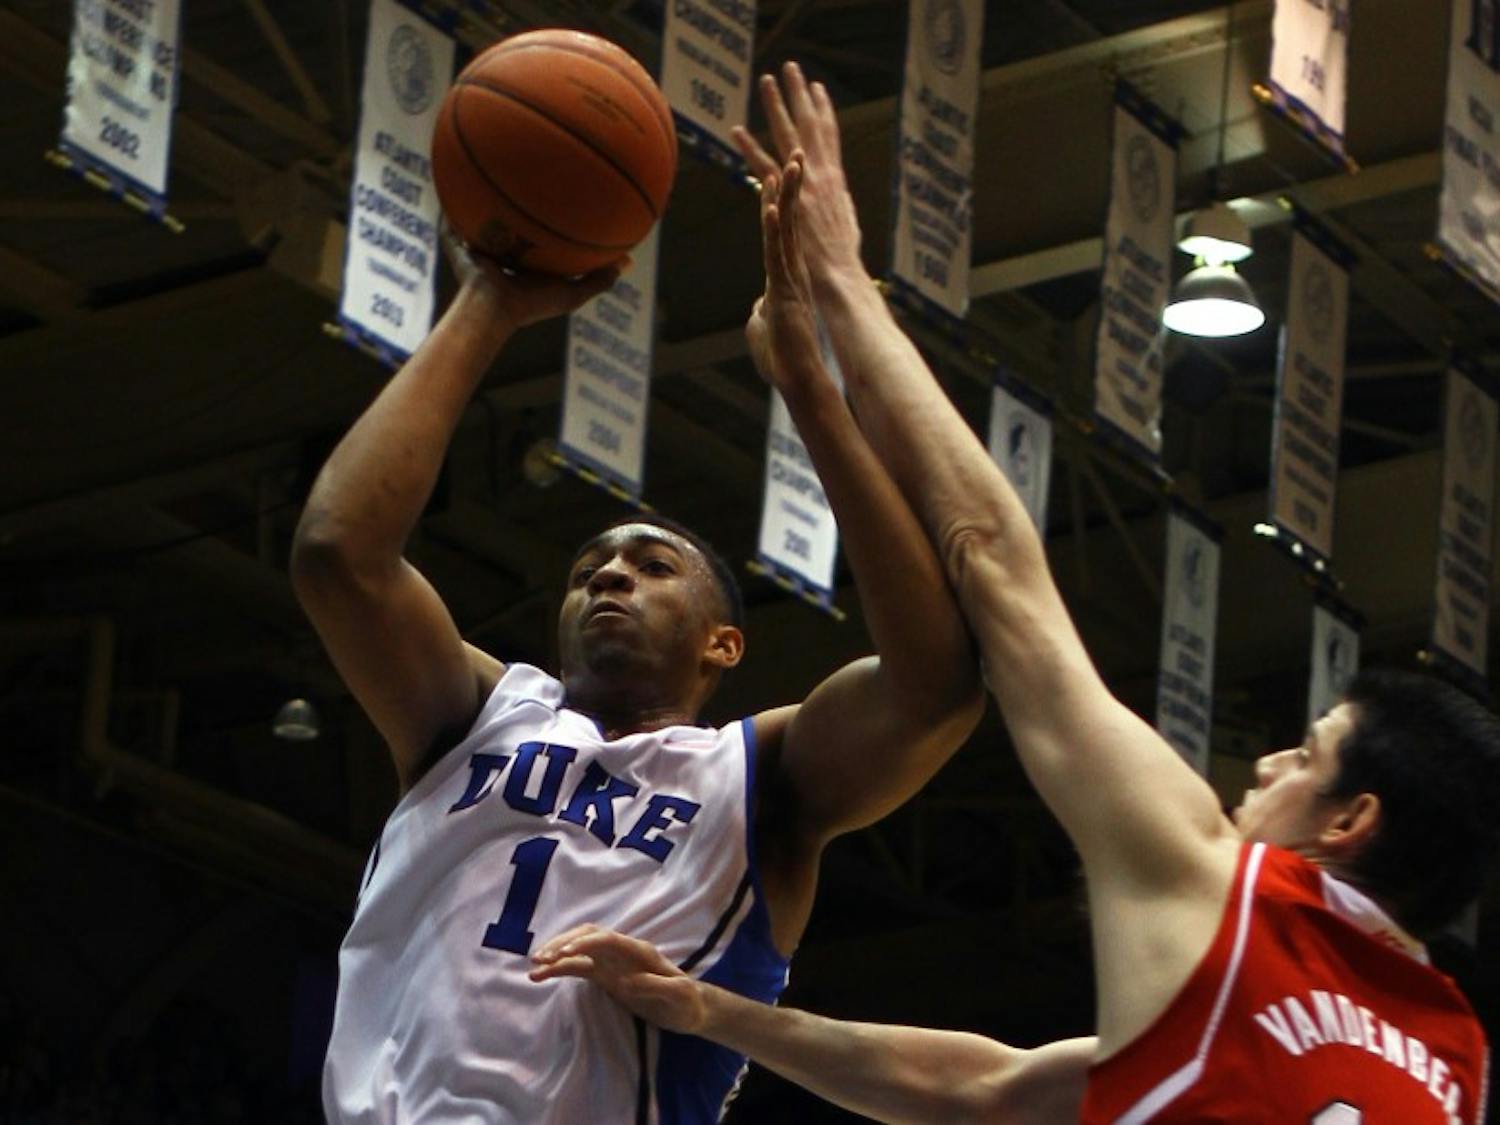 Jabari Parker led Duke’s rout against N.C. State with 23 points and will need to keep up his shooting touch to succeed against Miami’s zone defense.